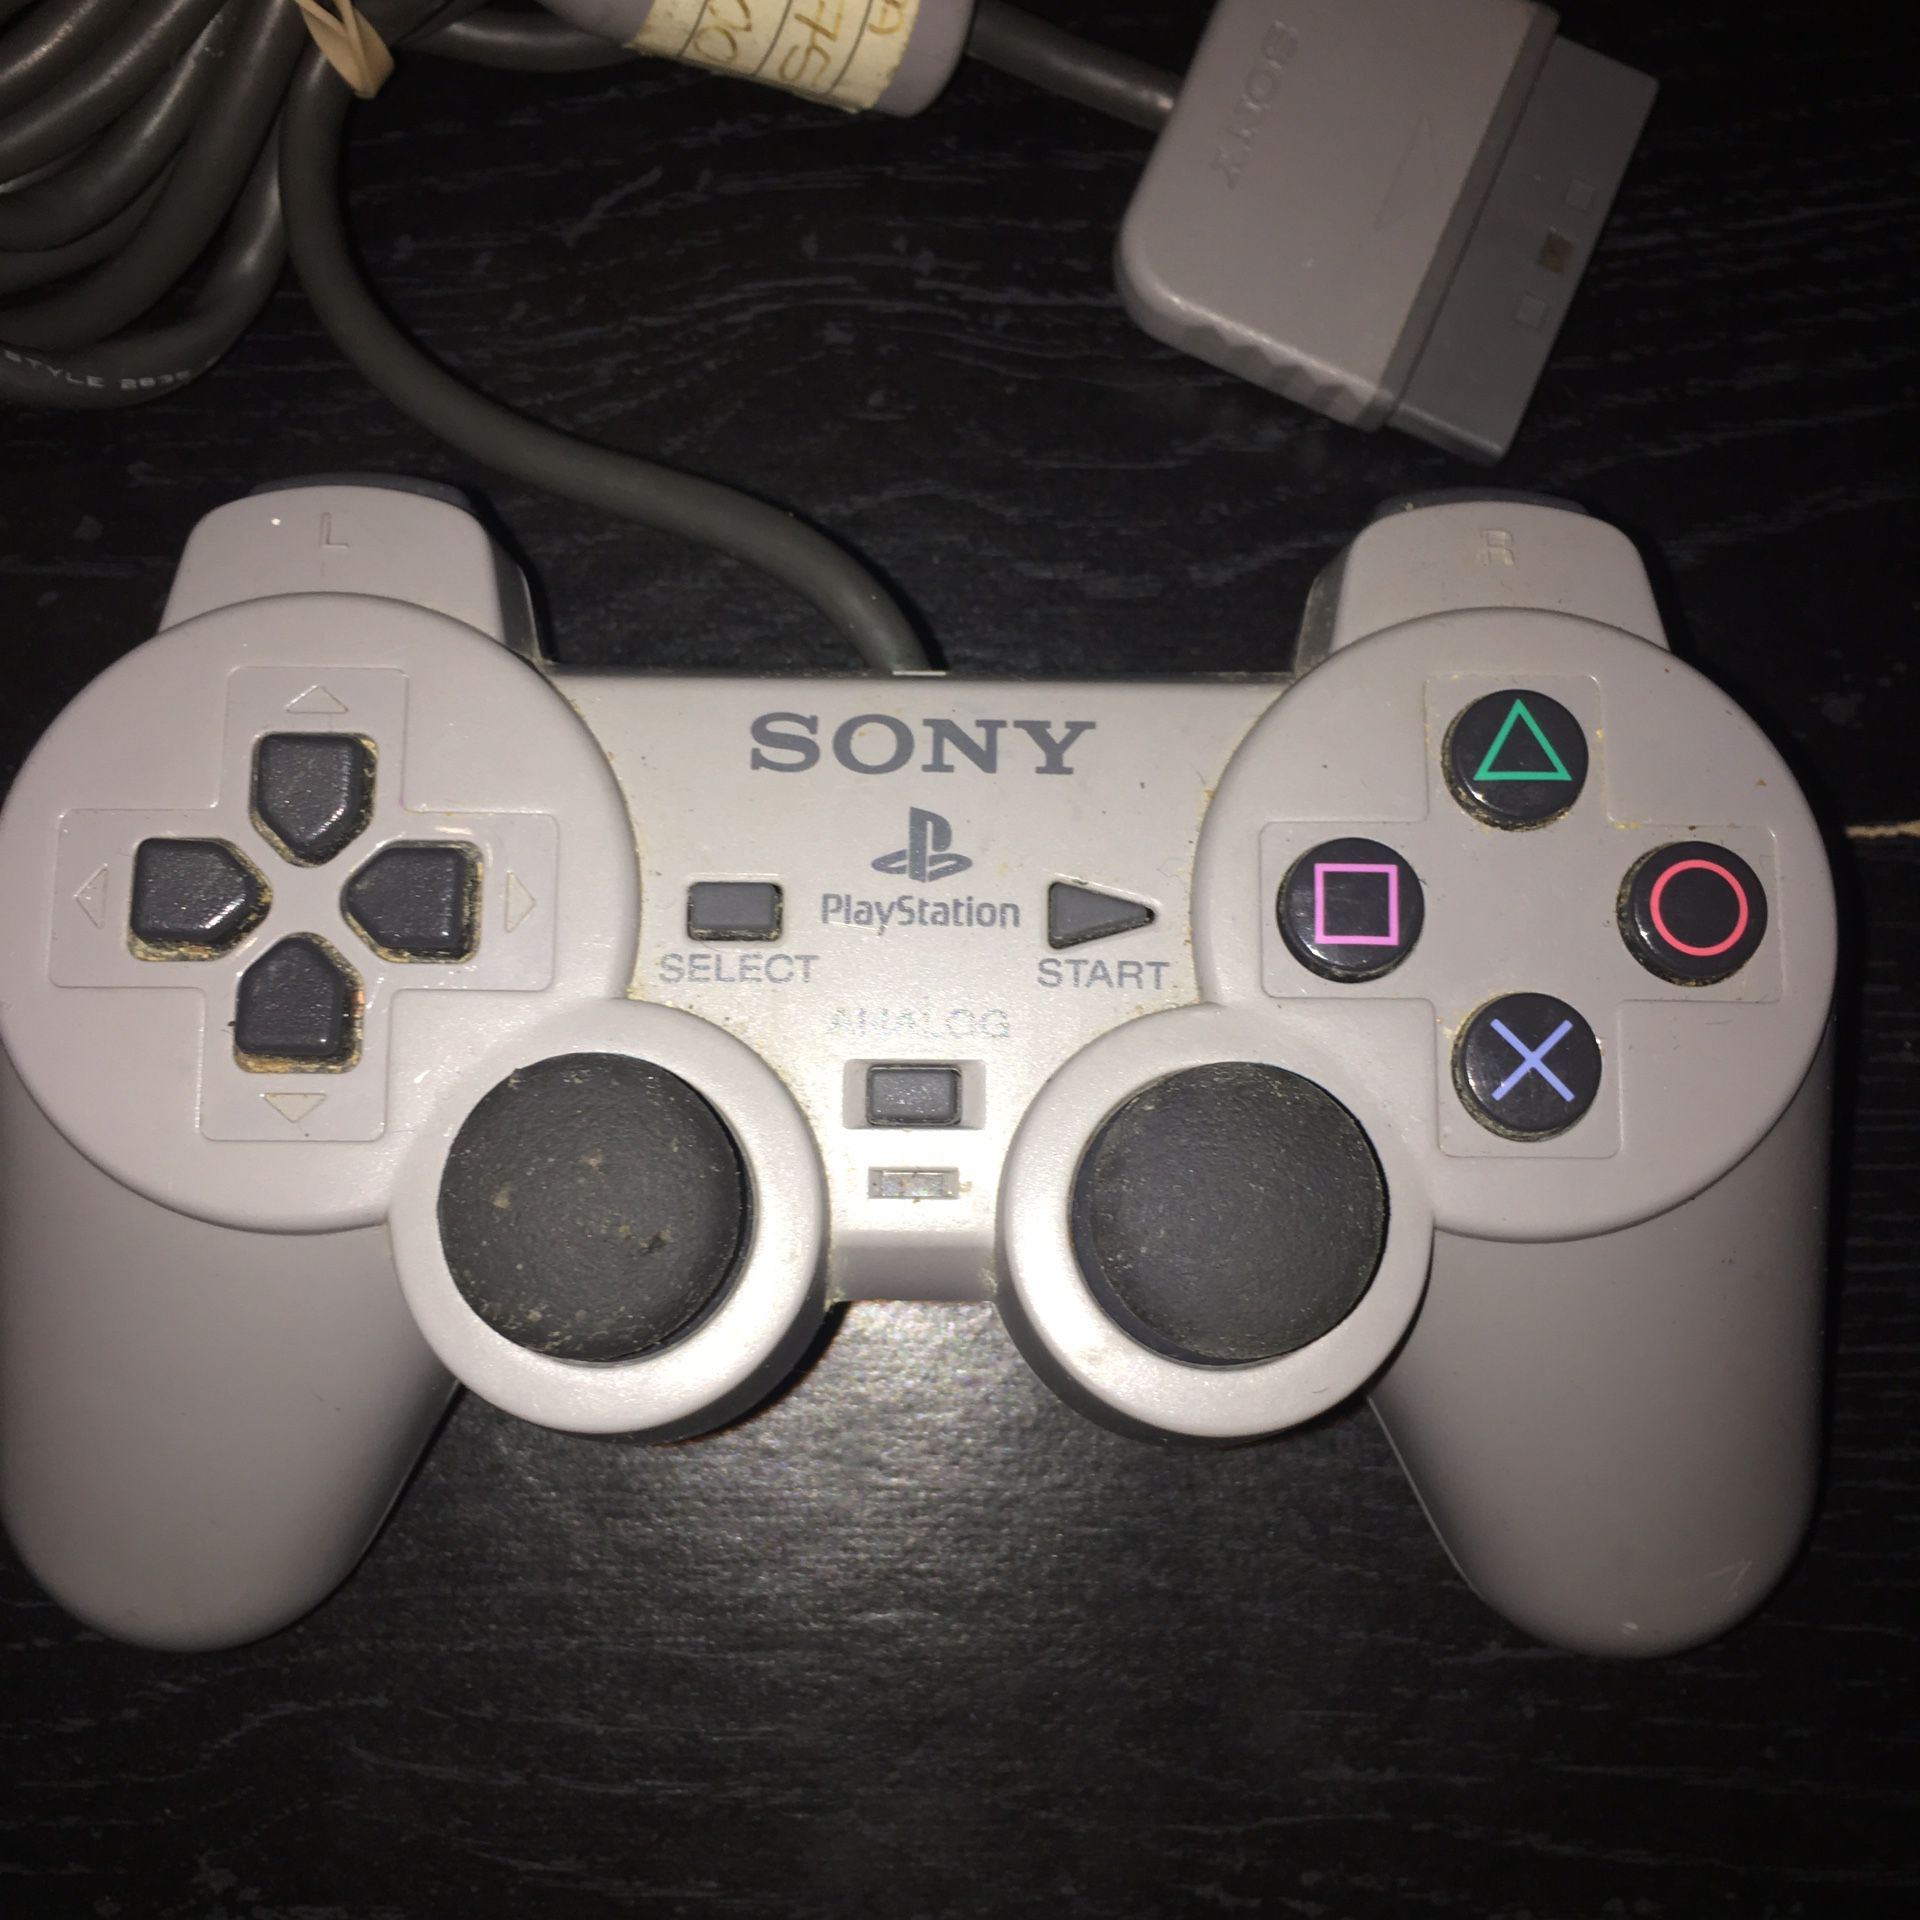 does ps1 controller work on ps2